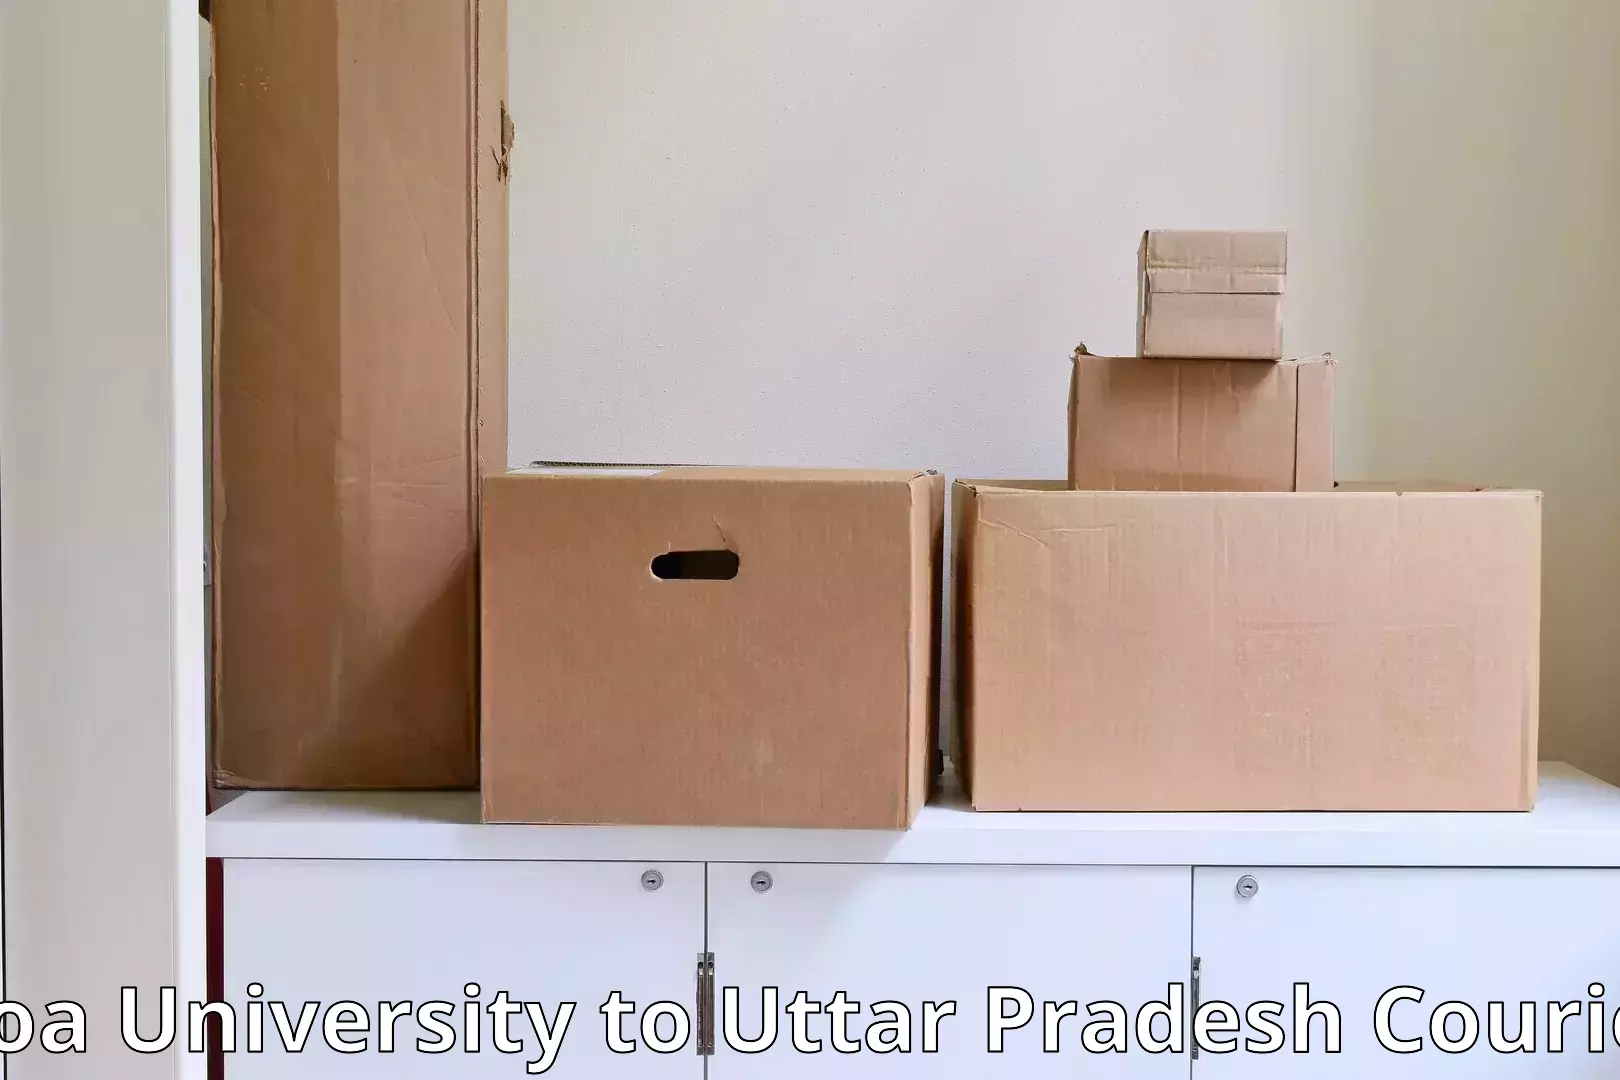 Home moving experts in Goa University to Chopan